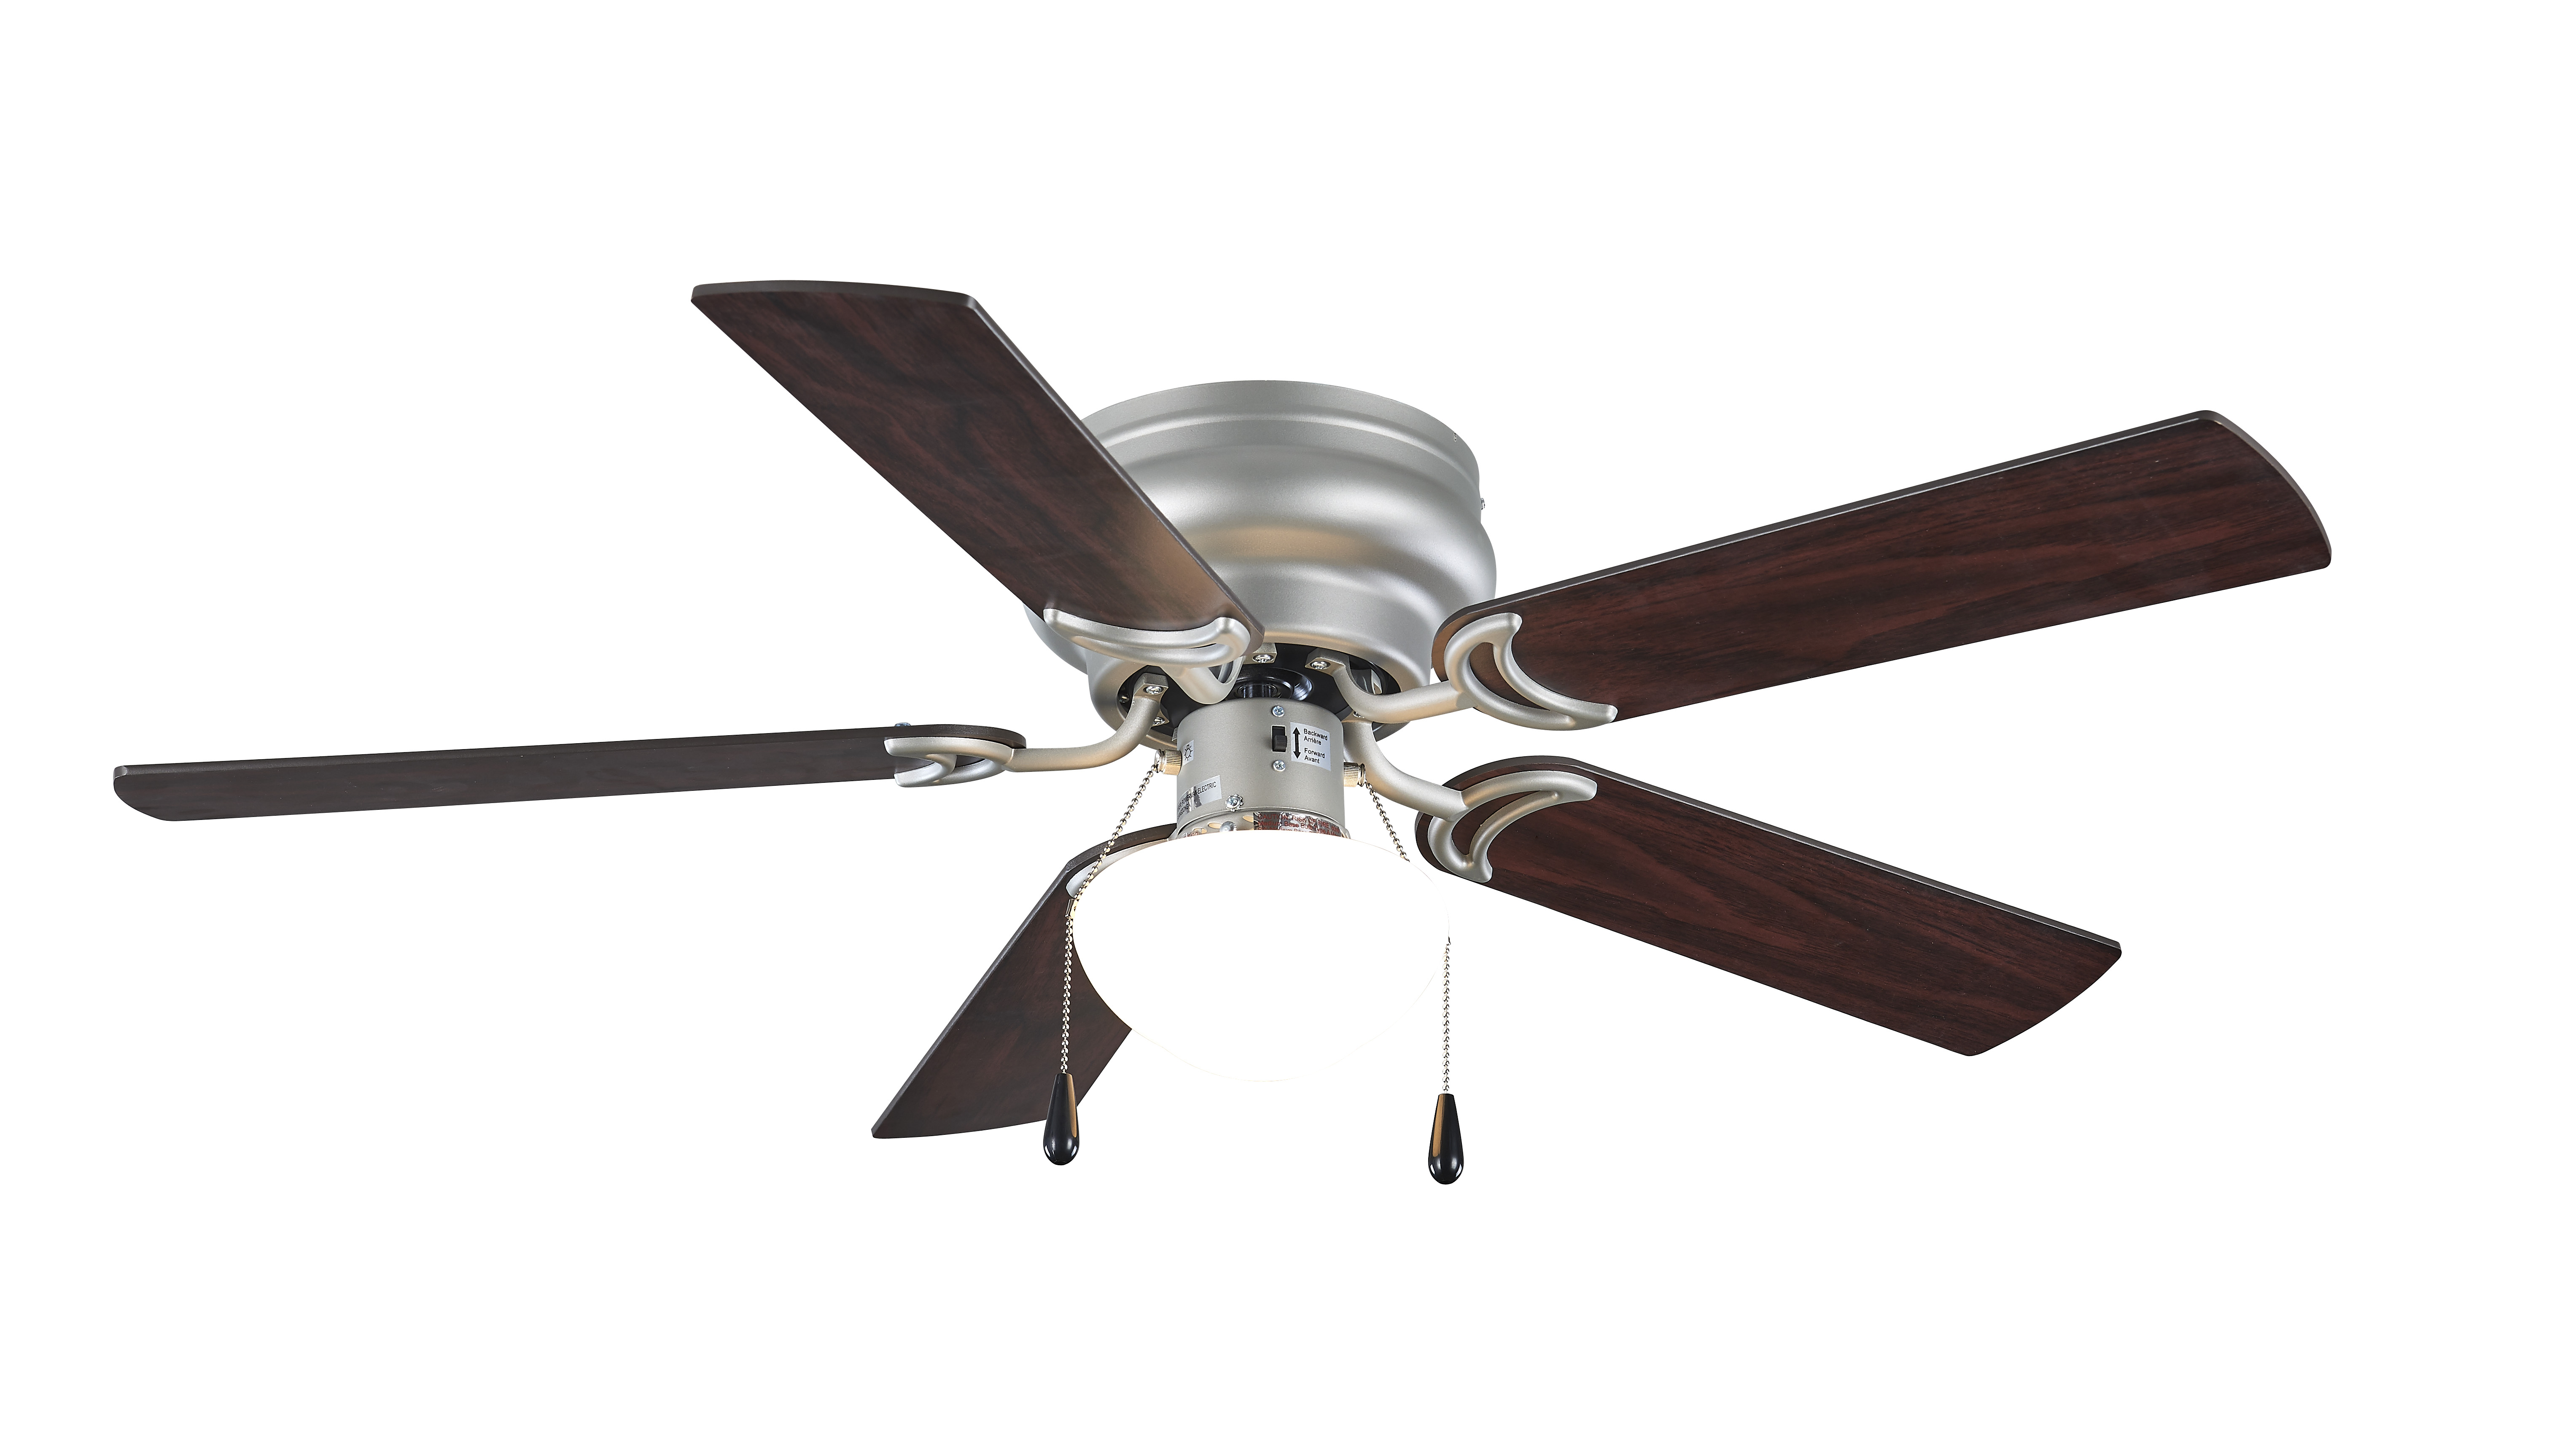 Mainstays 44" Hugger Indoor Ceiling Fan with Single Light, Satin Nickel, 5 Blades, LED, Reverse Airflow - image 1 of 8